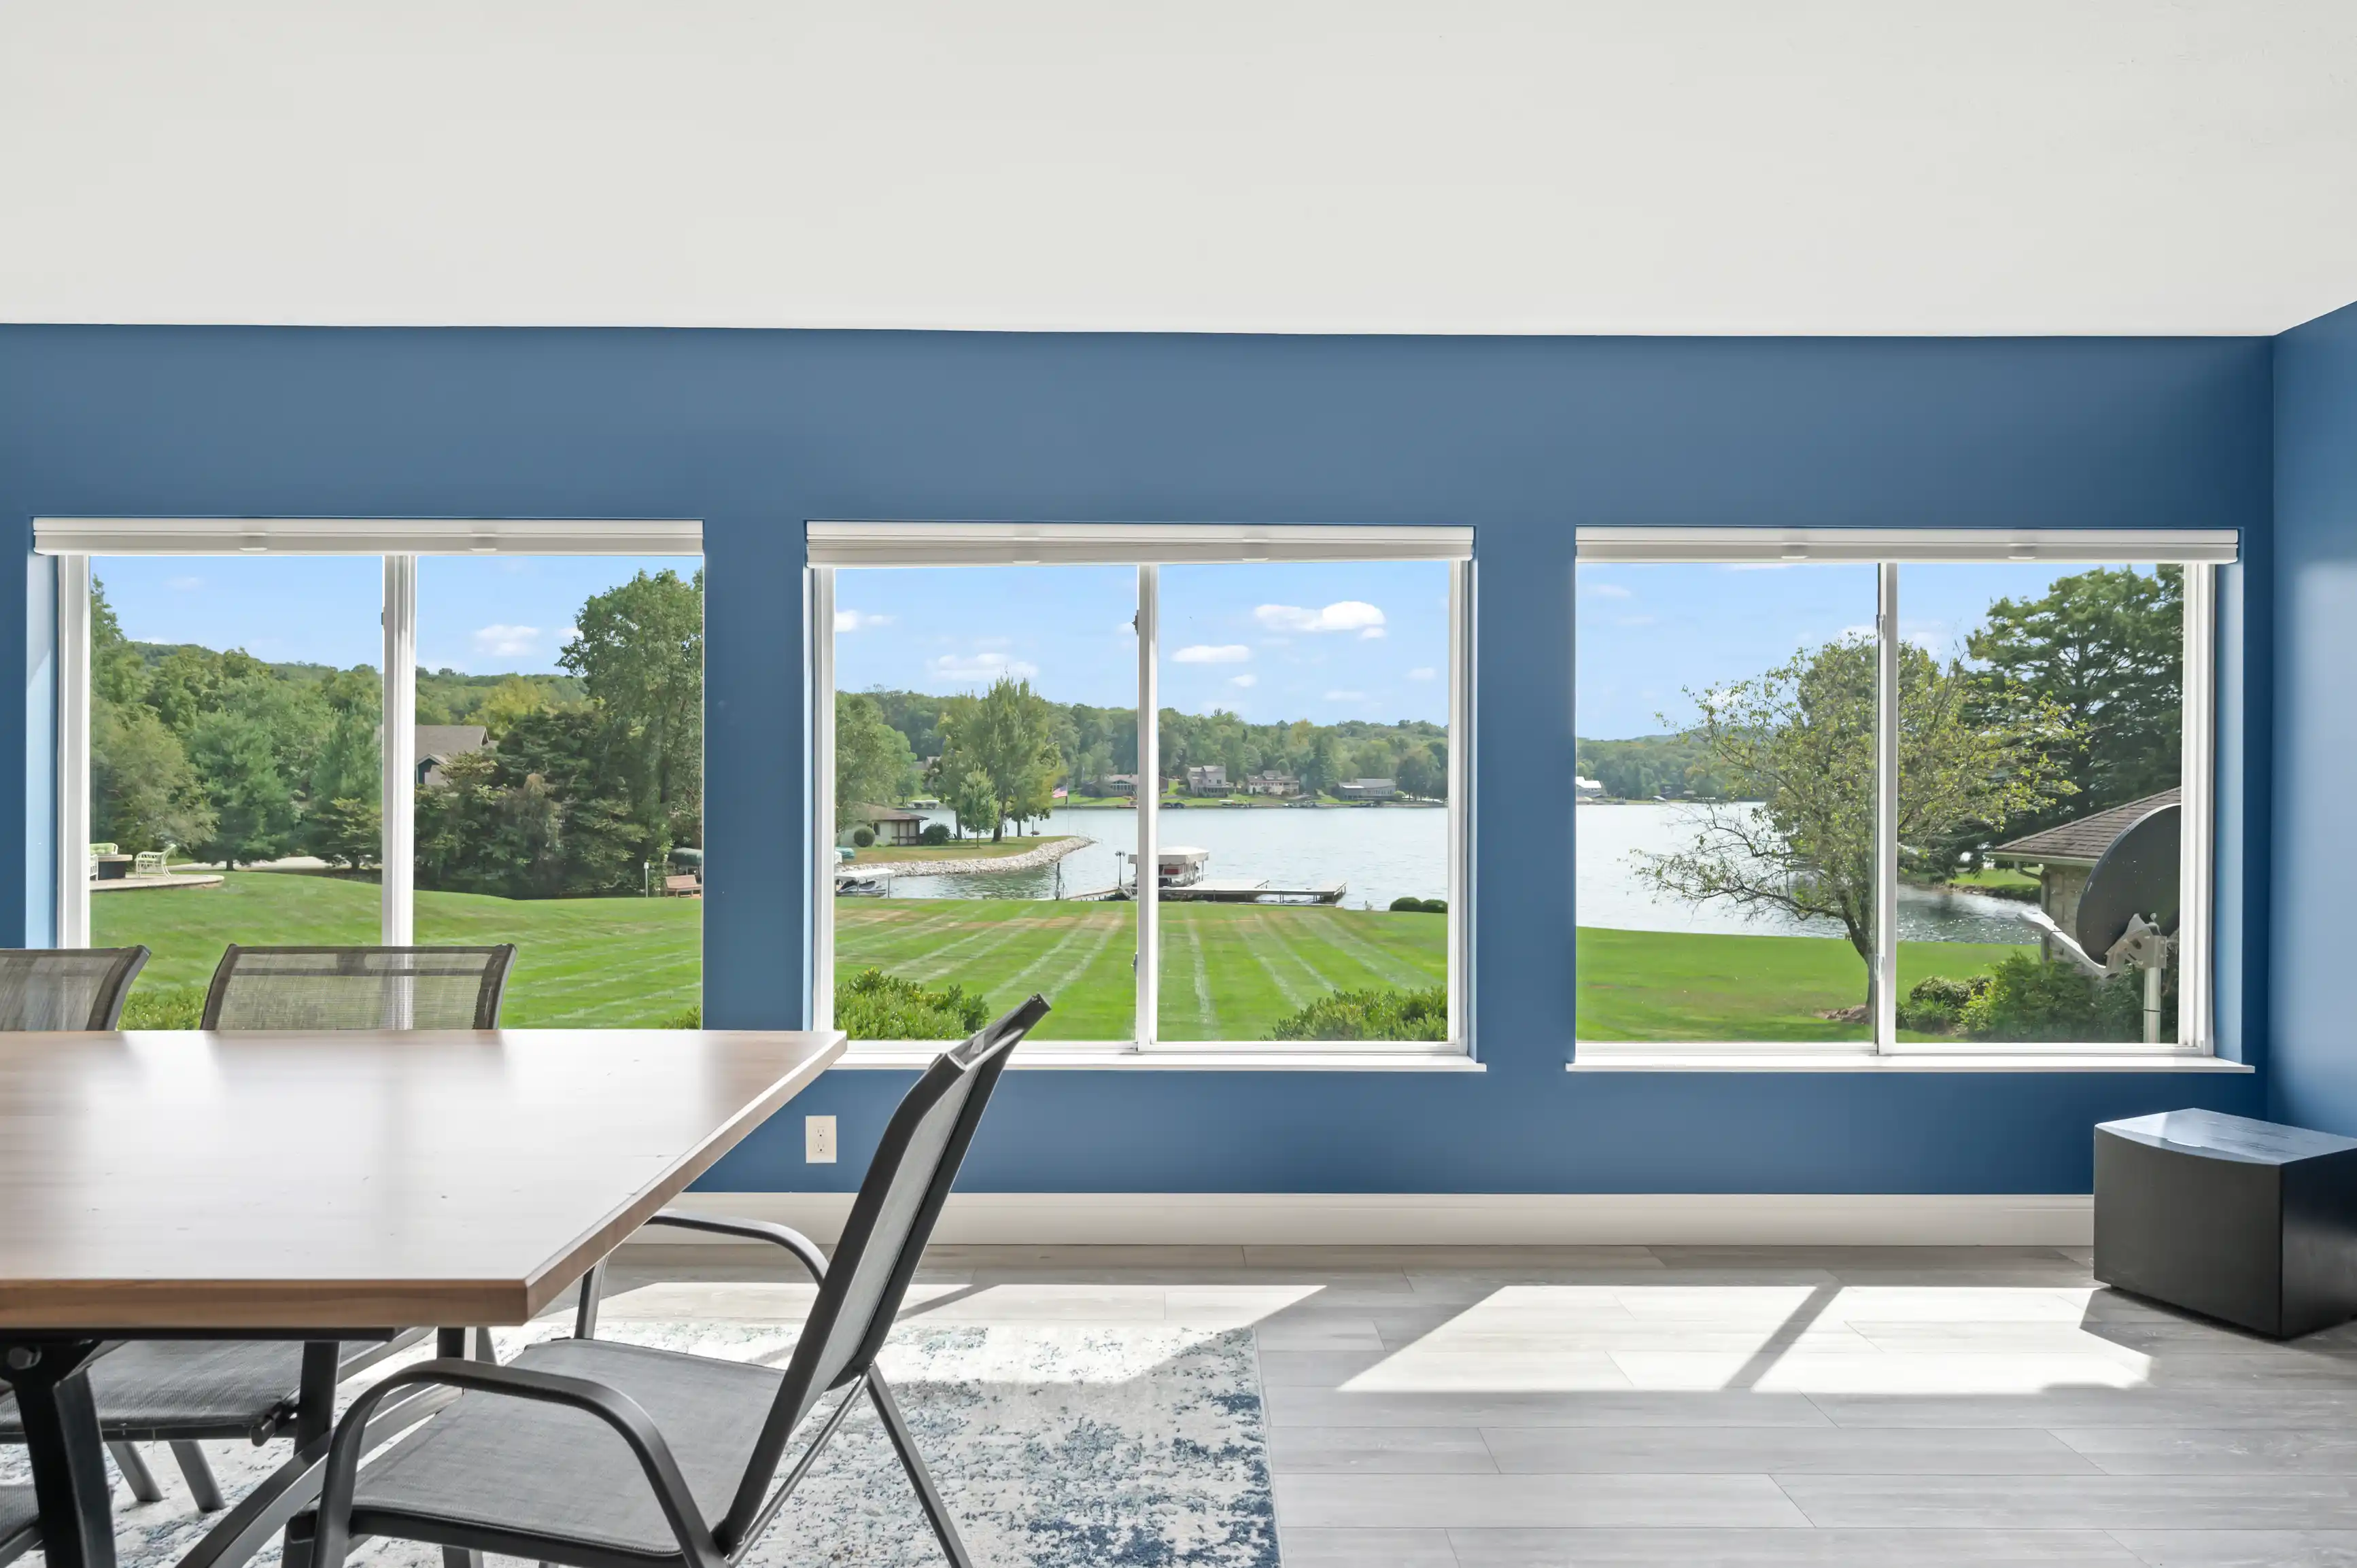 Spacious room with large windows overlooking a lake with green lawn and dock, featuring a minimalist dining table and blue accent wall.